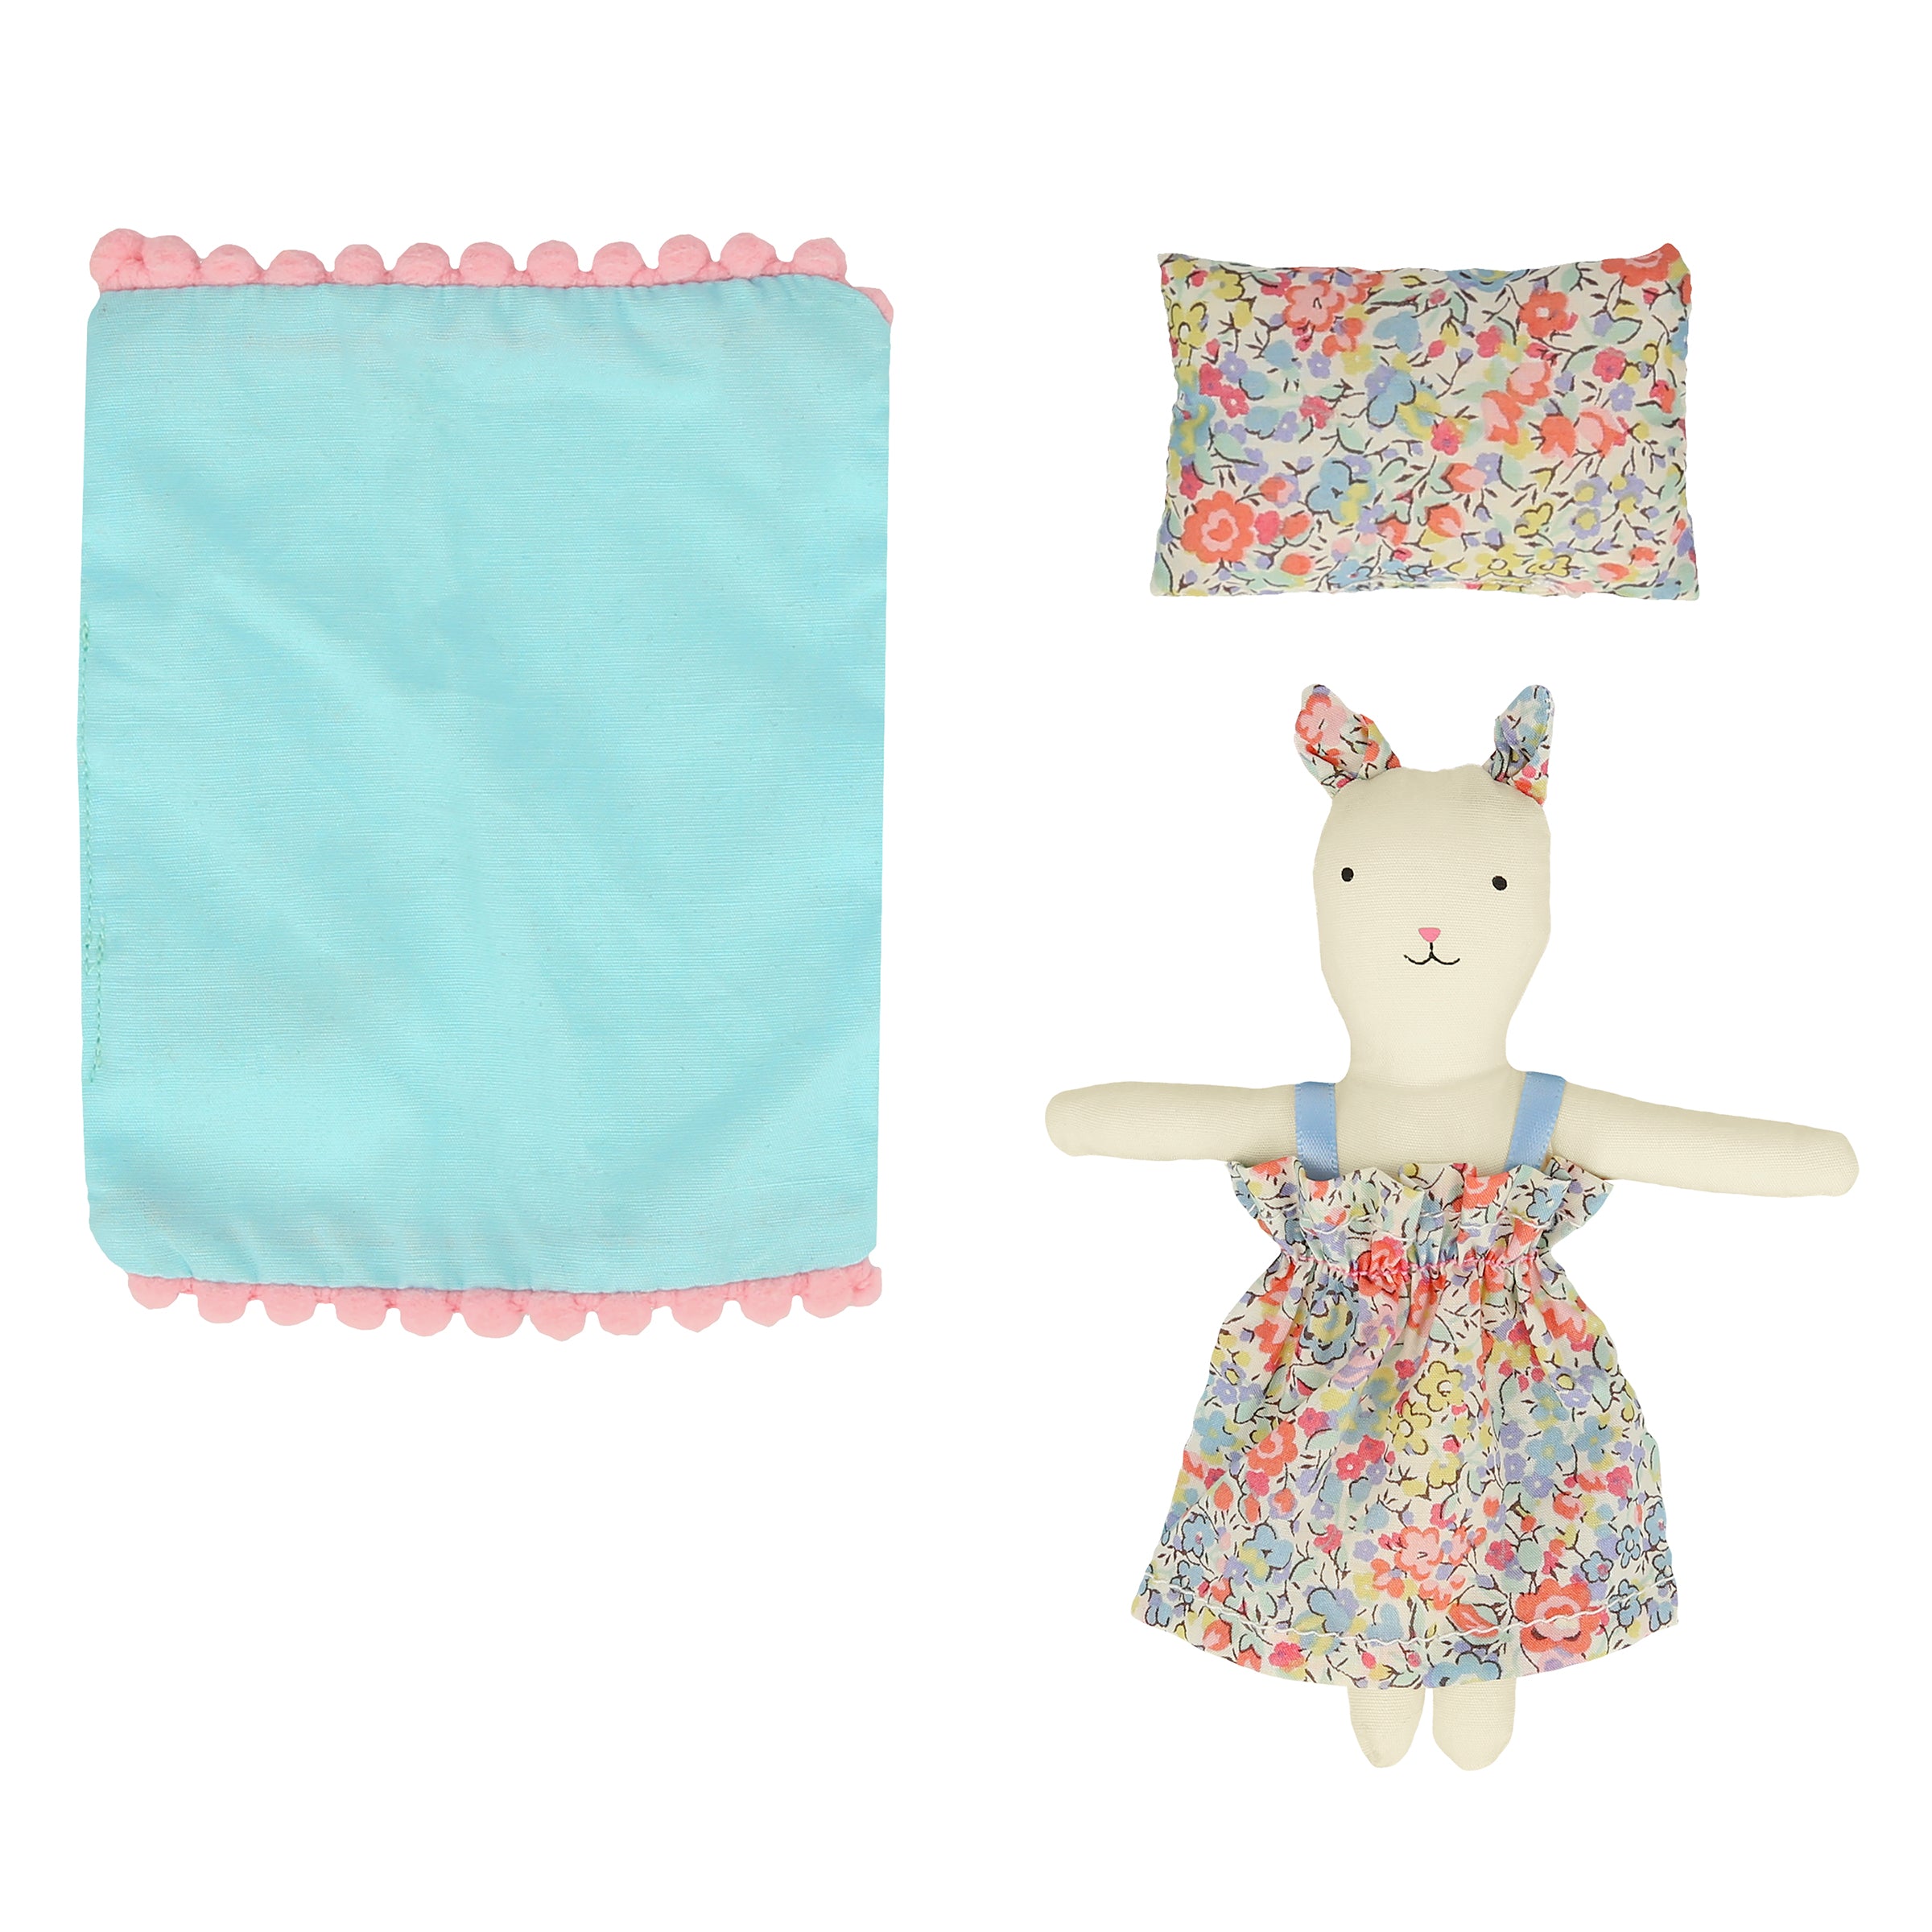 Our fabric doll and accessories, all contained in a little suitcase, is perfect to use as travel toys.